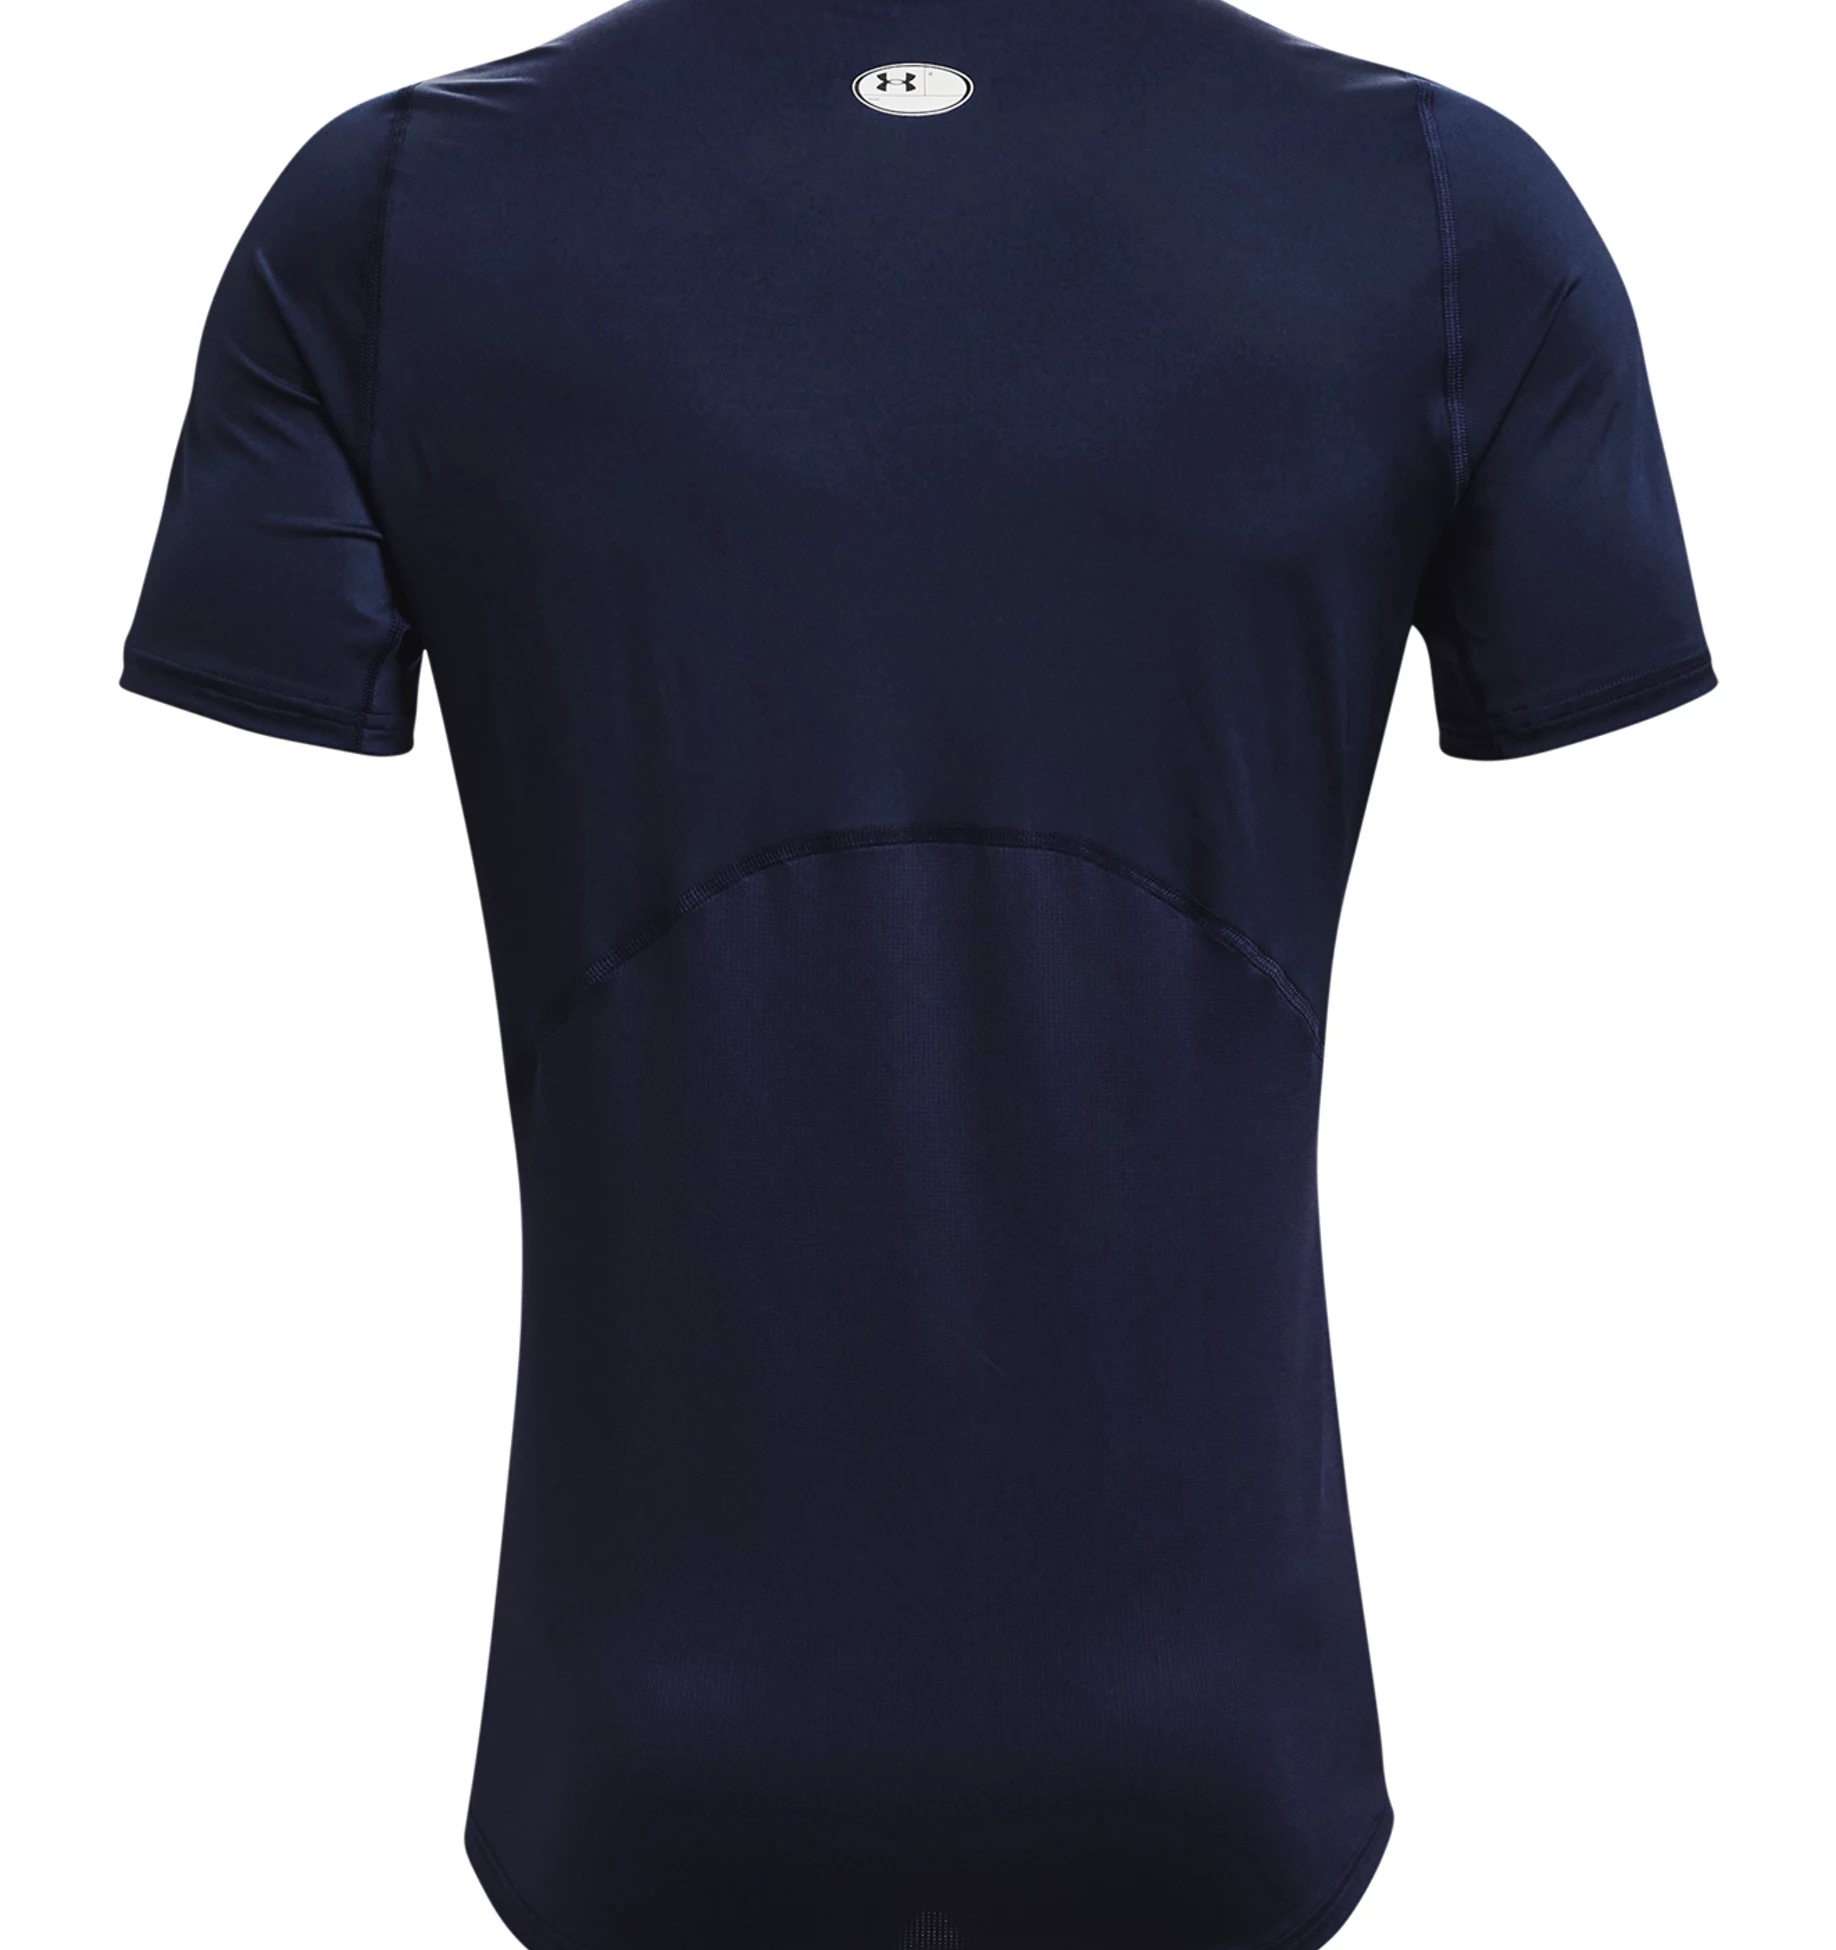 https://i1.t4s.cz/products/1361683-410/under-armour-ua-hg-armour-fitted-ss-tee-328995-1361683-412.jpg